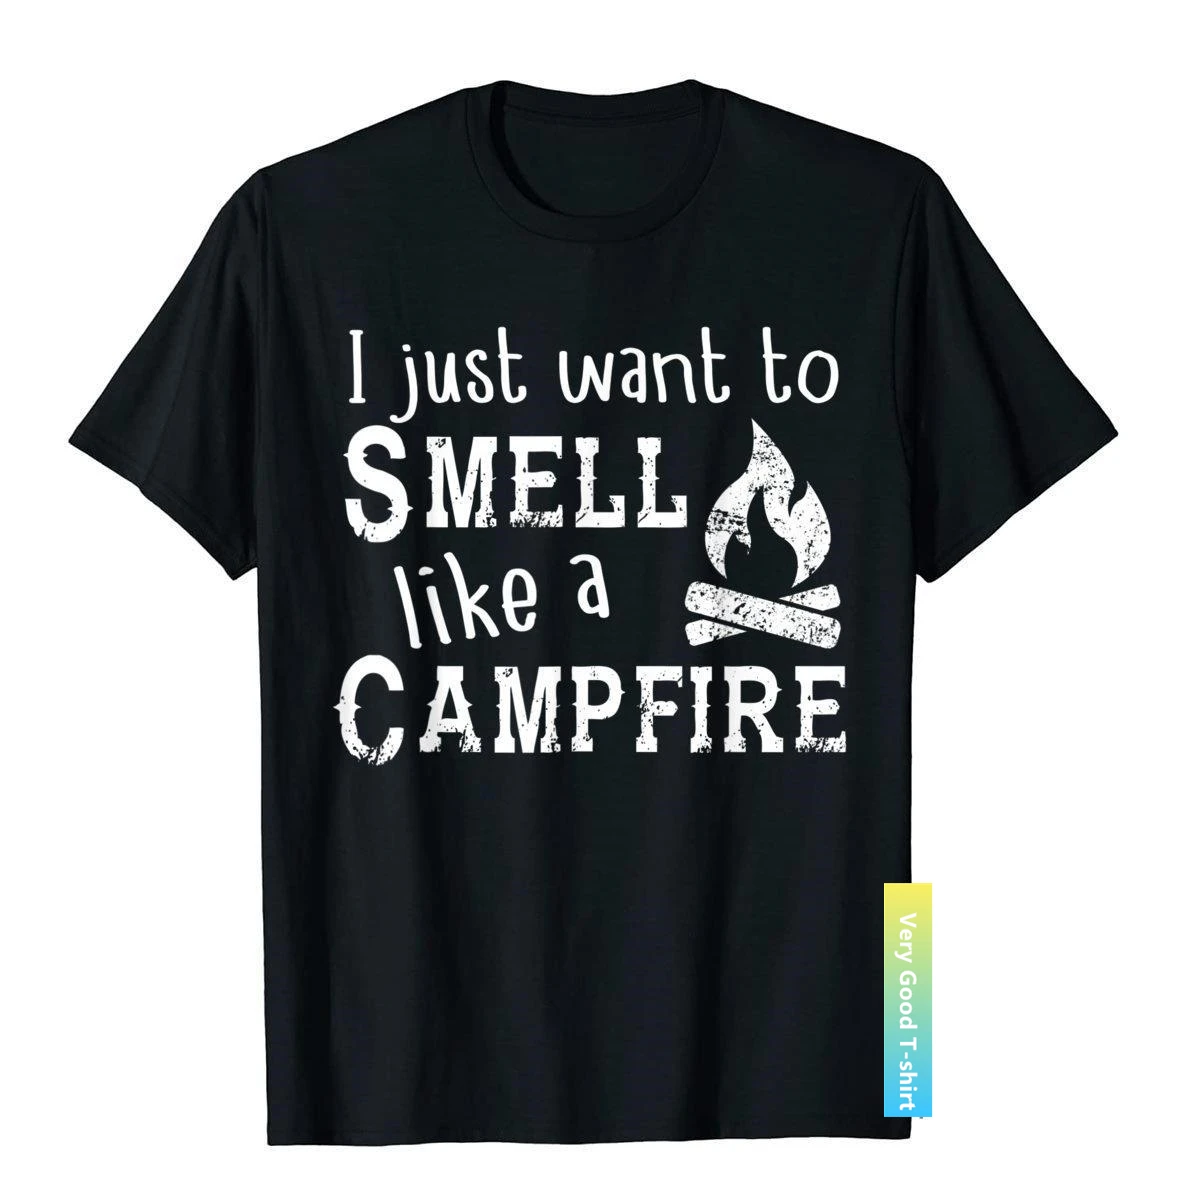 

I Just Want To Smell Like A Campfire Shirt - Camping Funny Fitness T Shirts For Men Cotton Tops Shirt 3D Printed New Coming